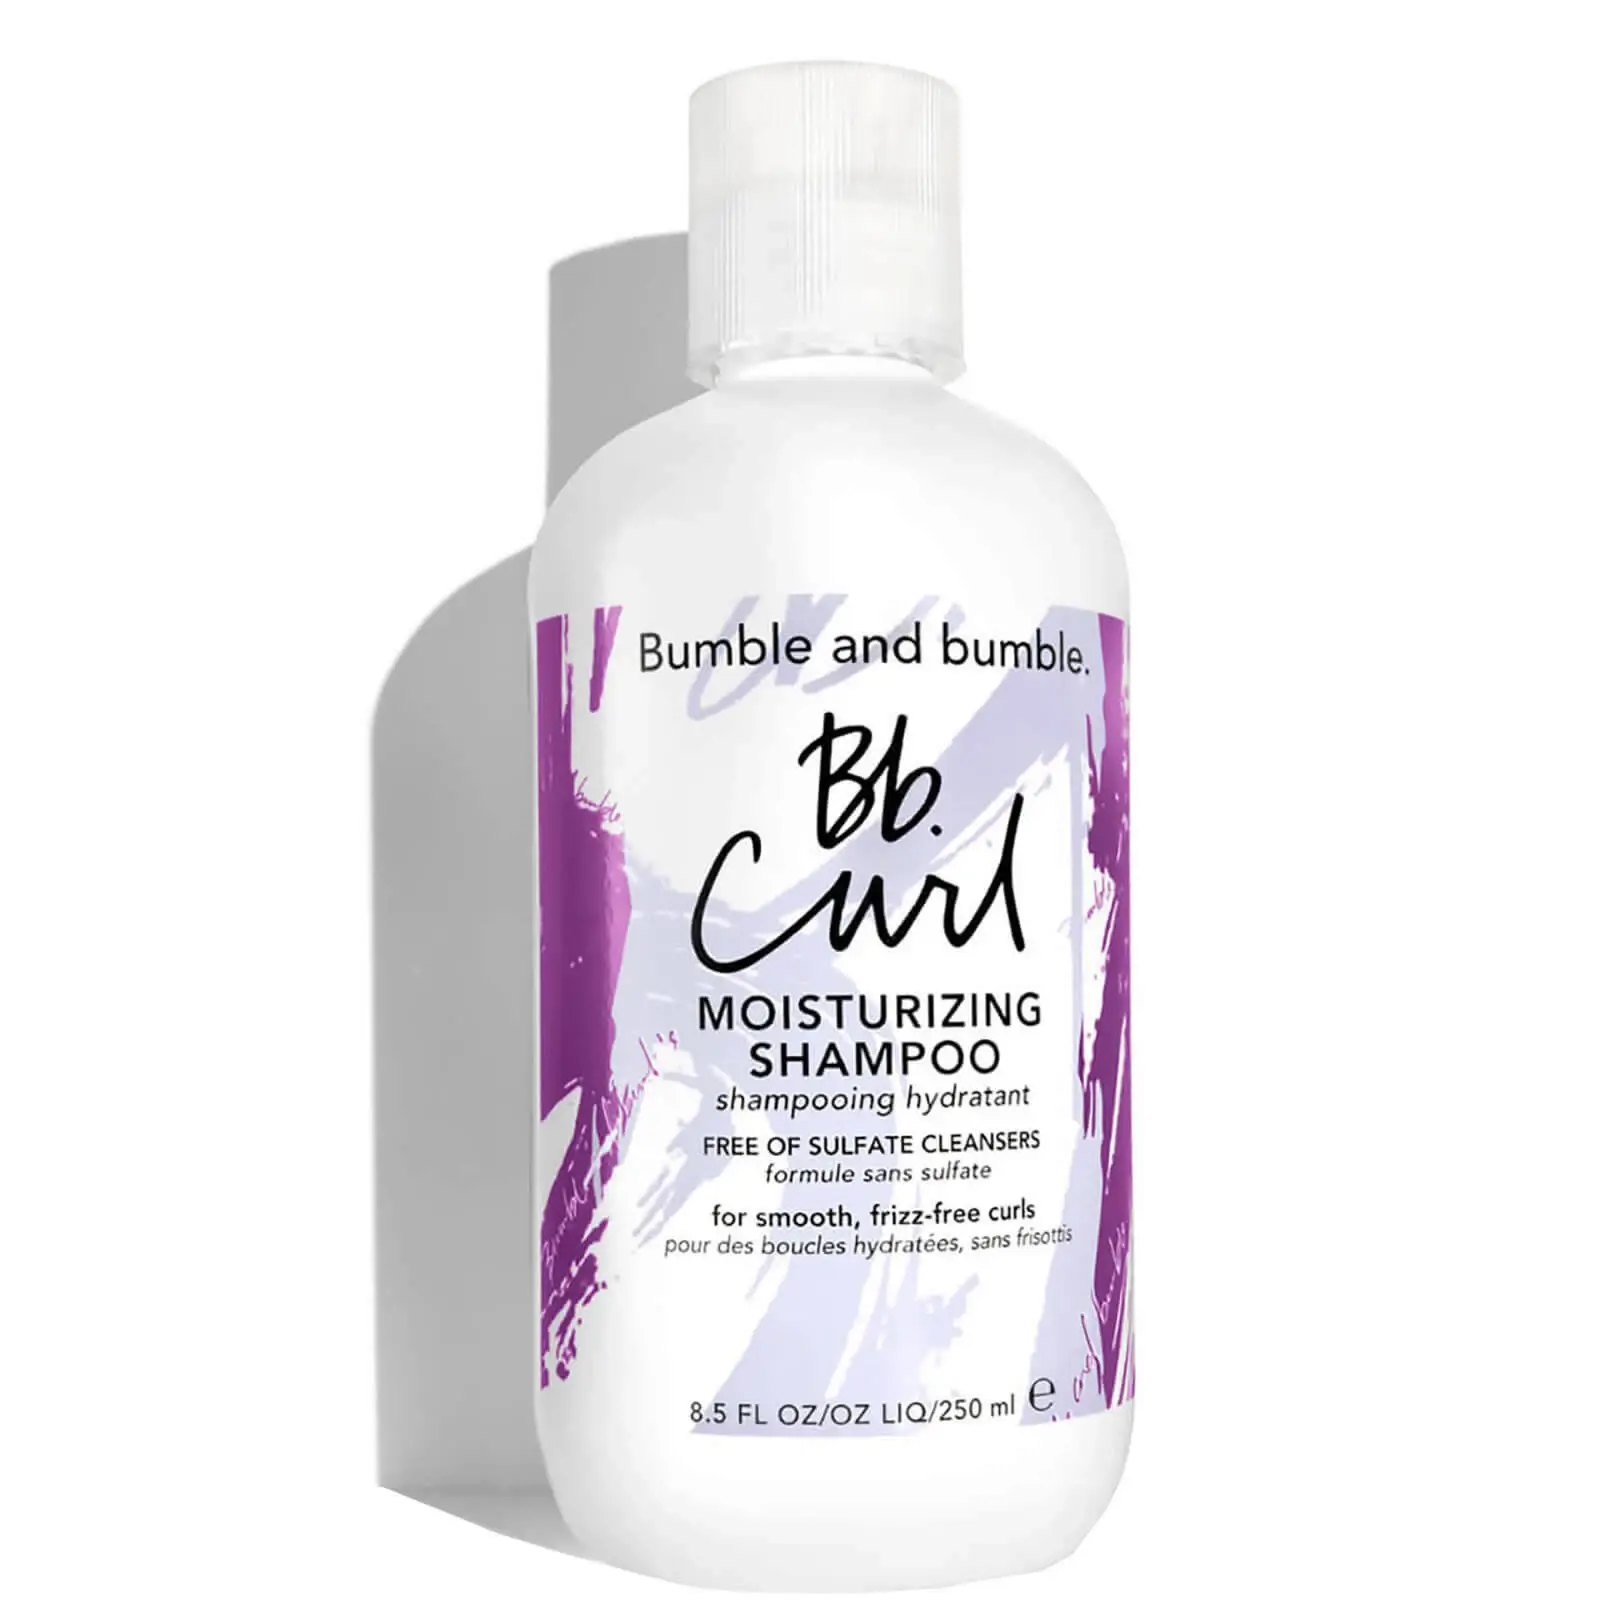 Bumble and Bumble Curl Shampoo (60ml)